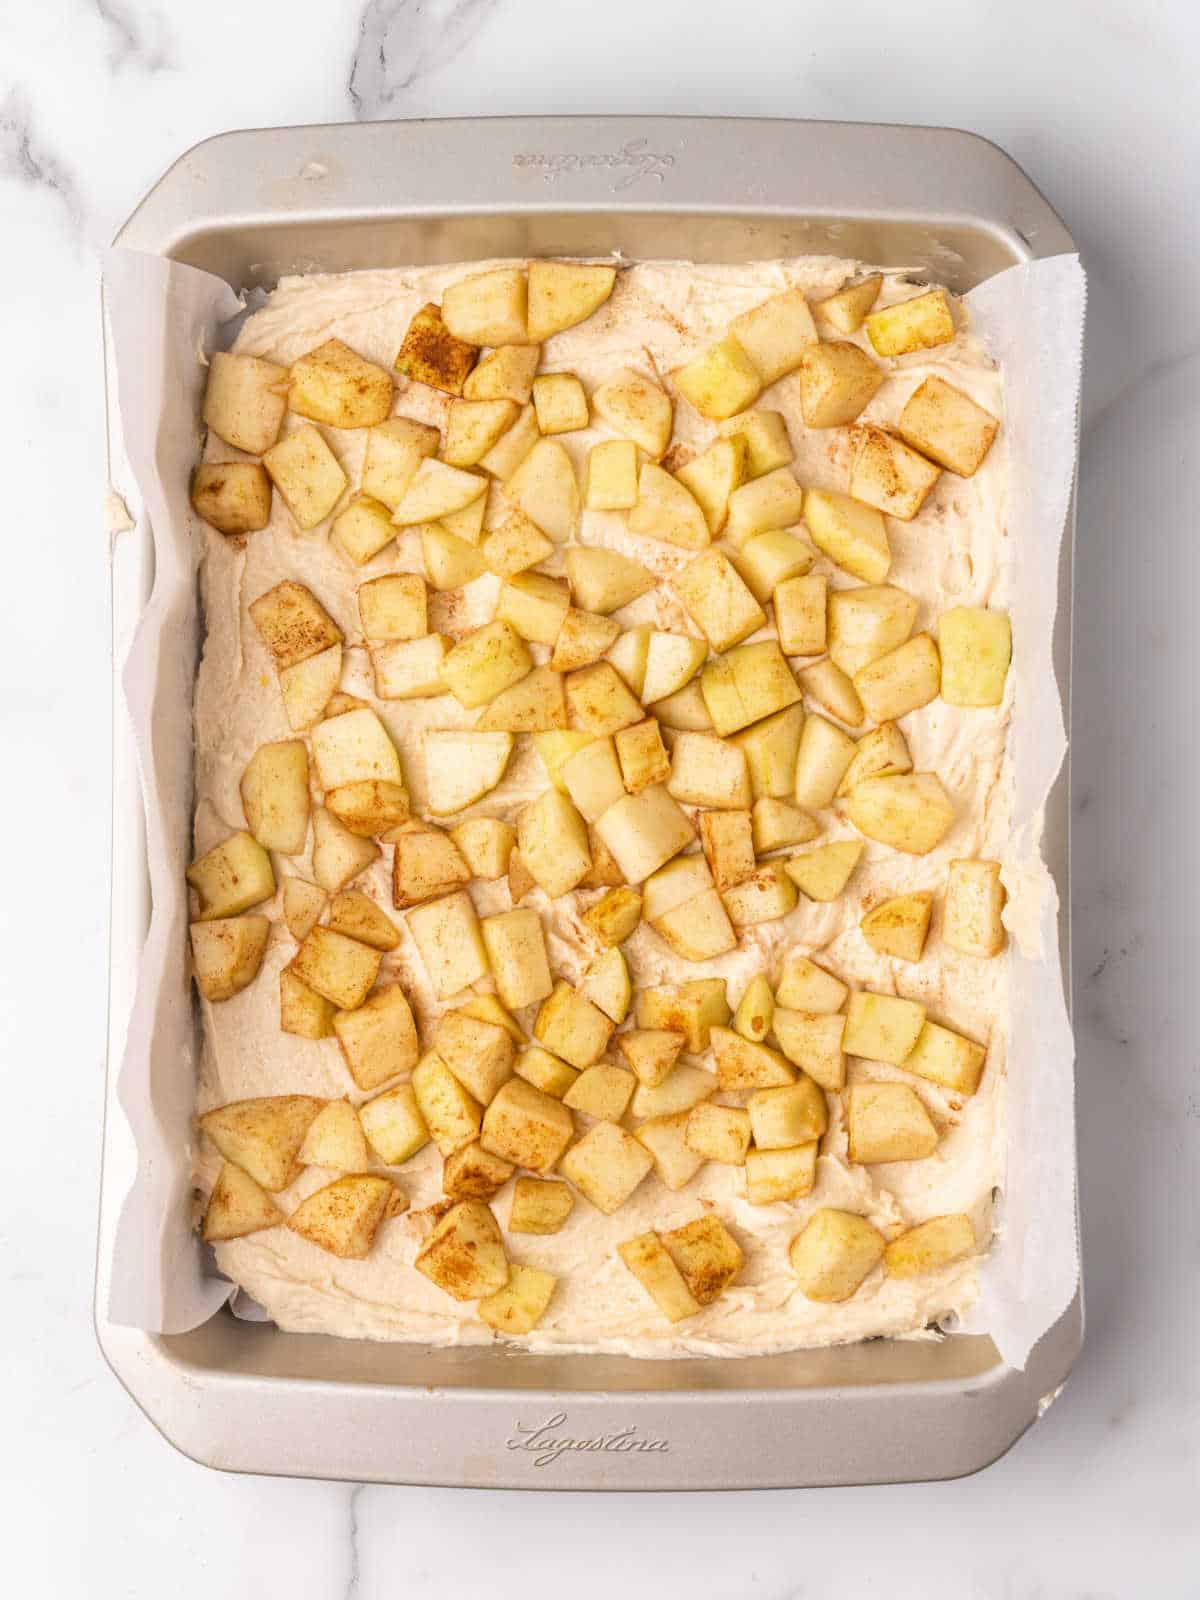 Cake batter and diced apples on a rectangular metal pan placed on white marble surface.